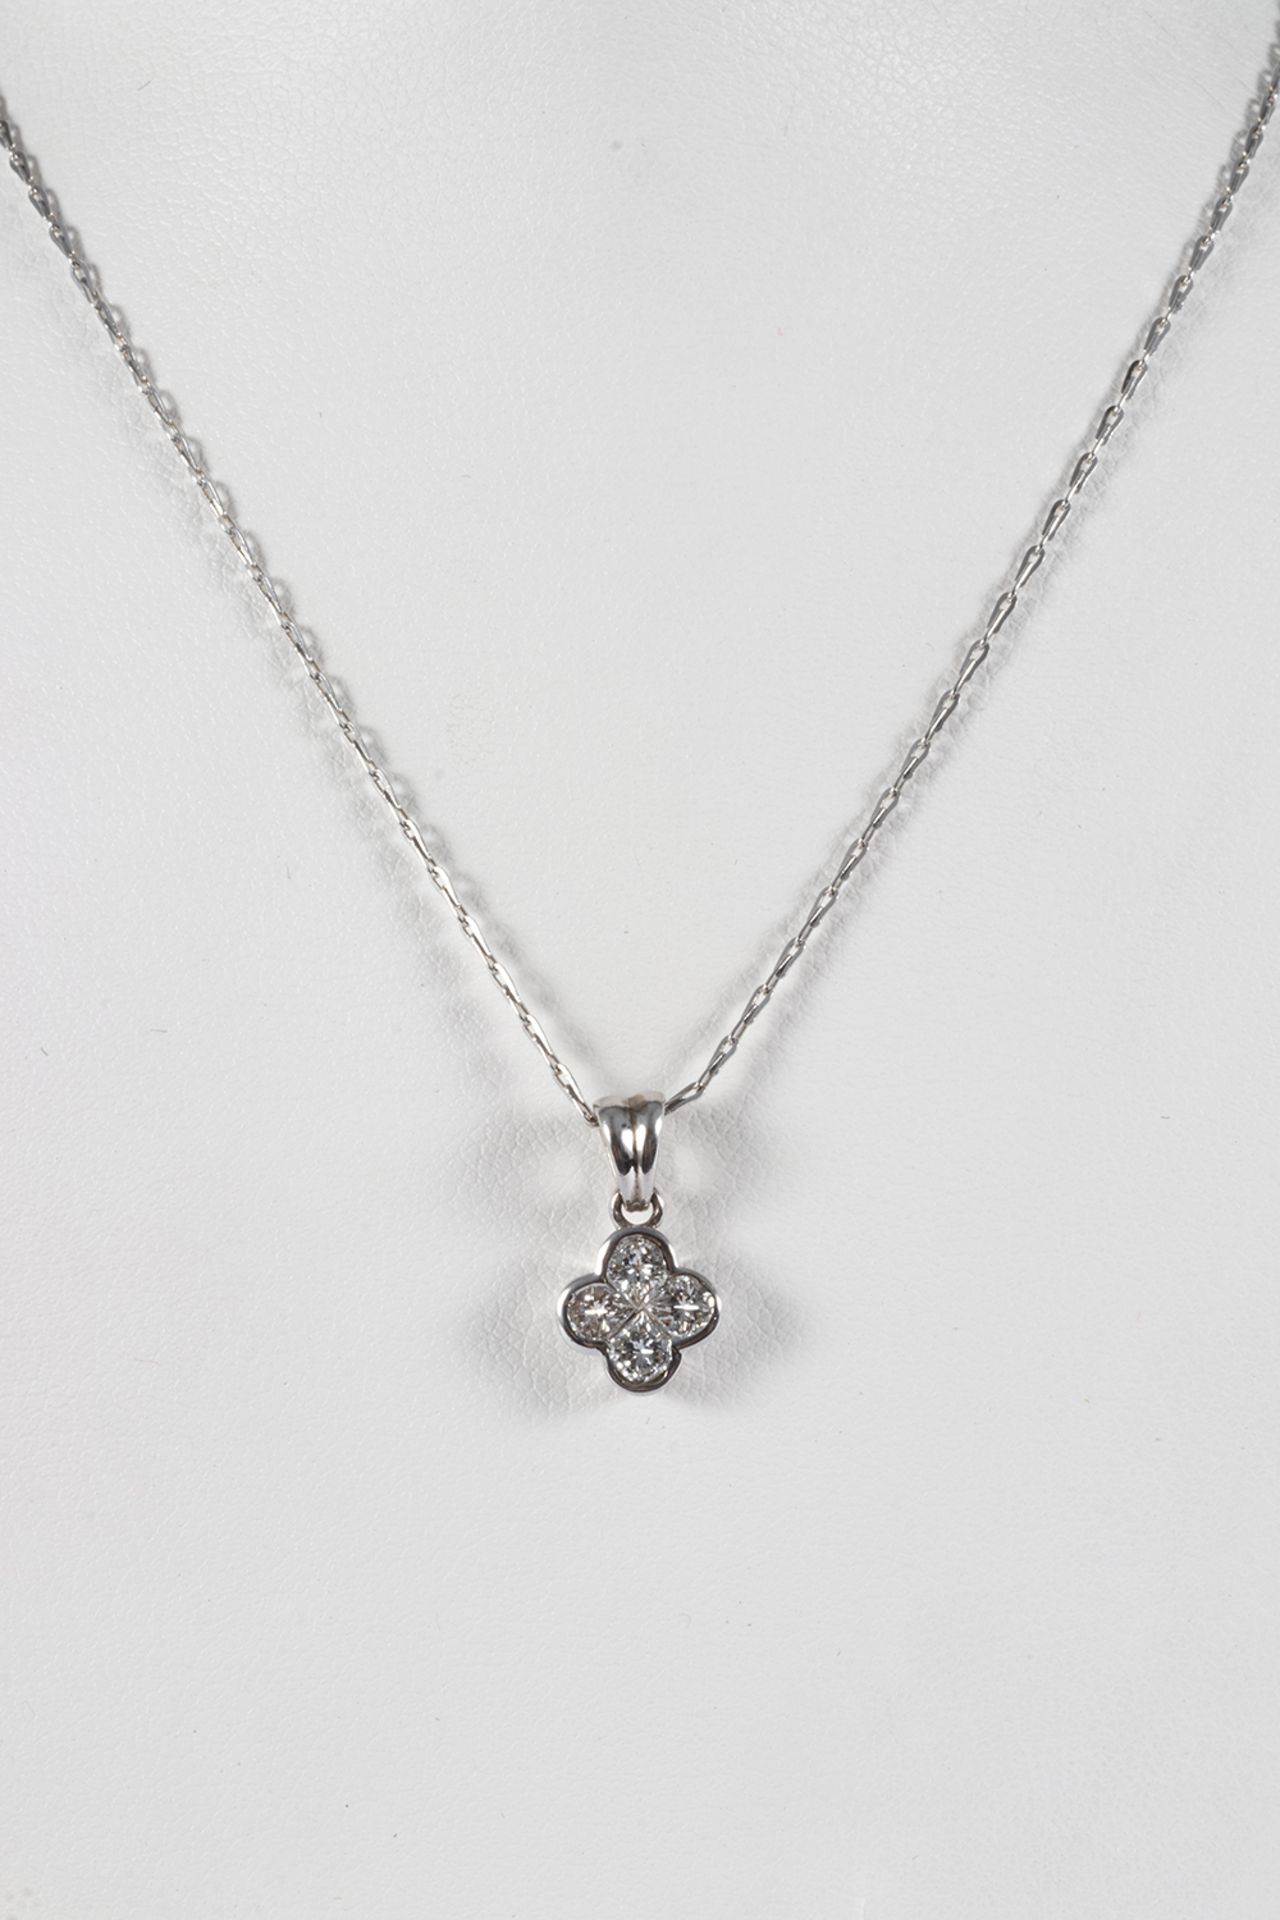 Pendant with chain in white gold and goatee-cut diamonds. - Image 2 of 2